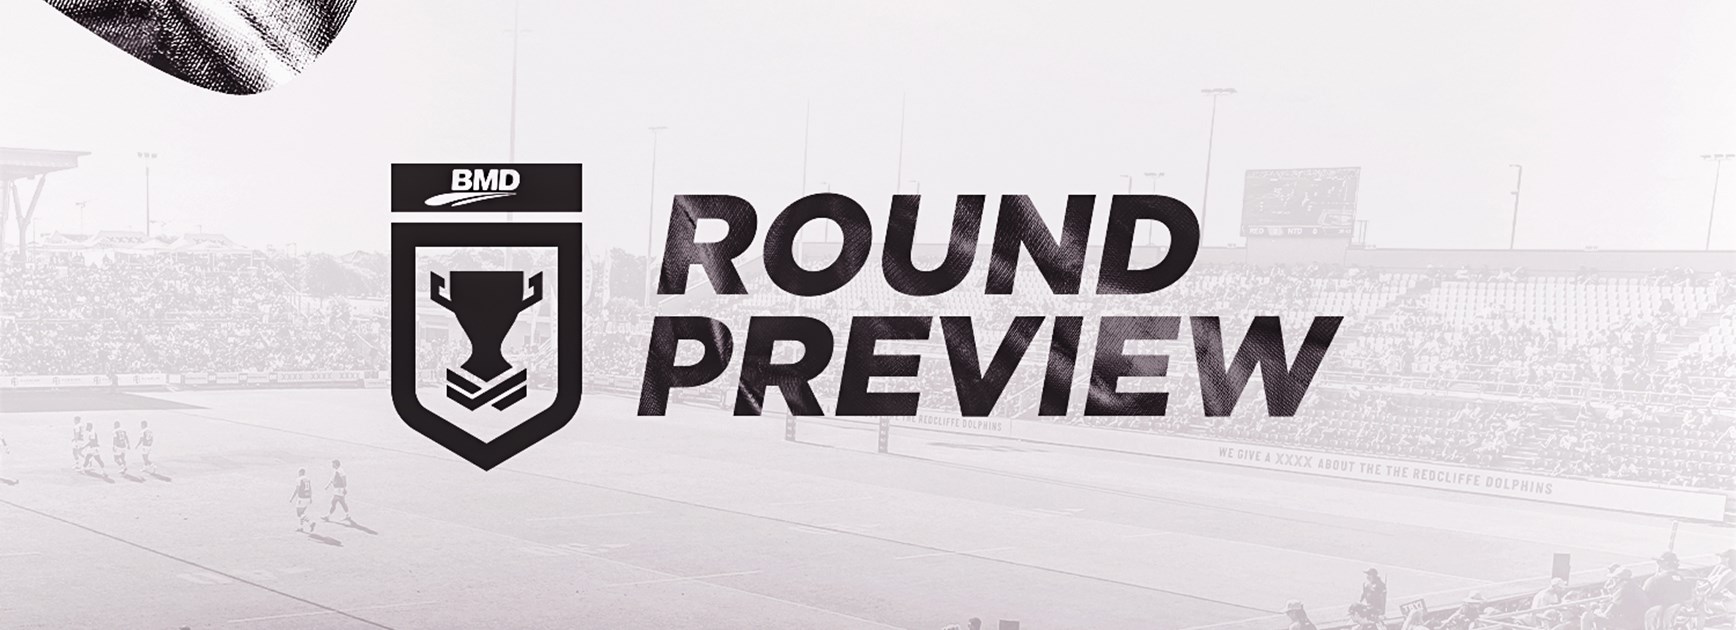 BMD Premiership Round 1 preview